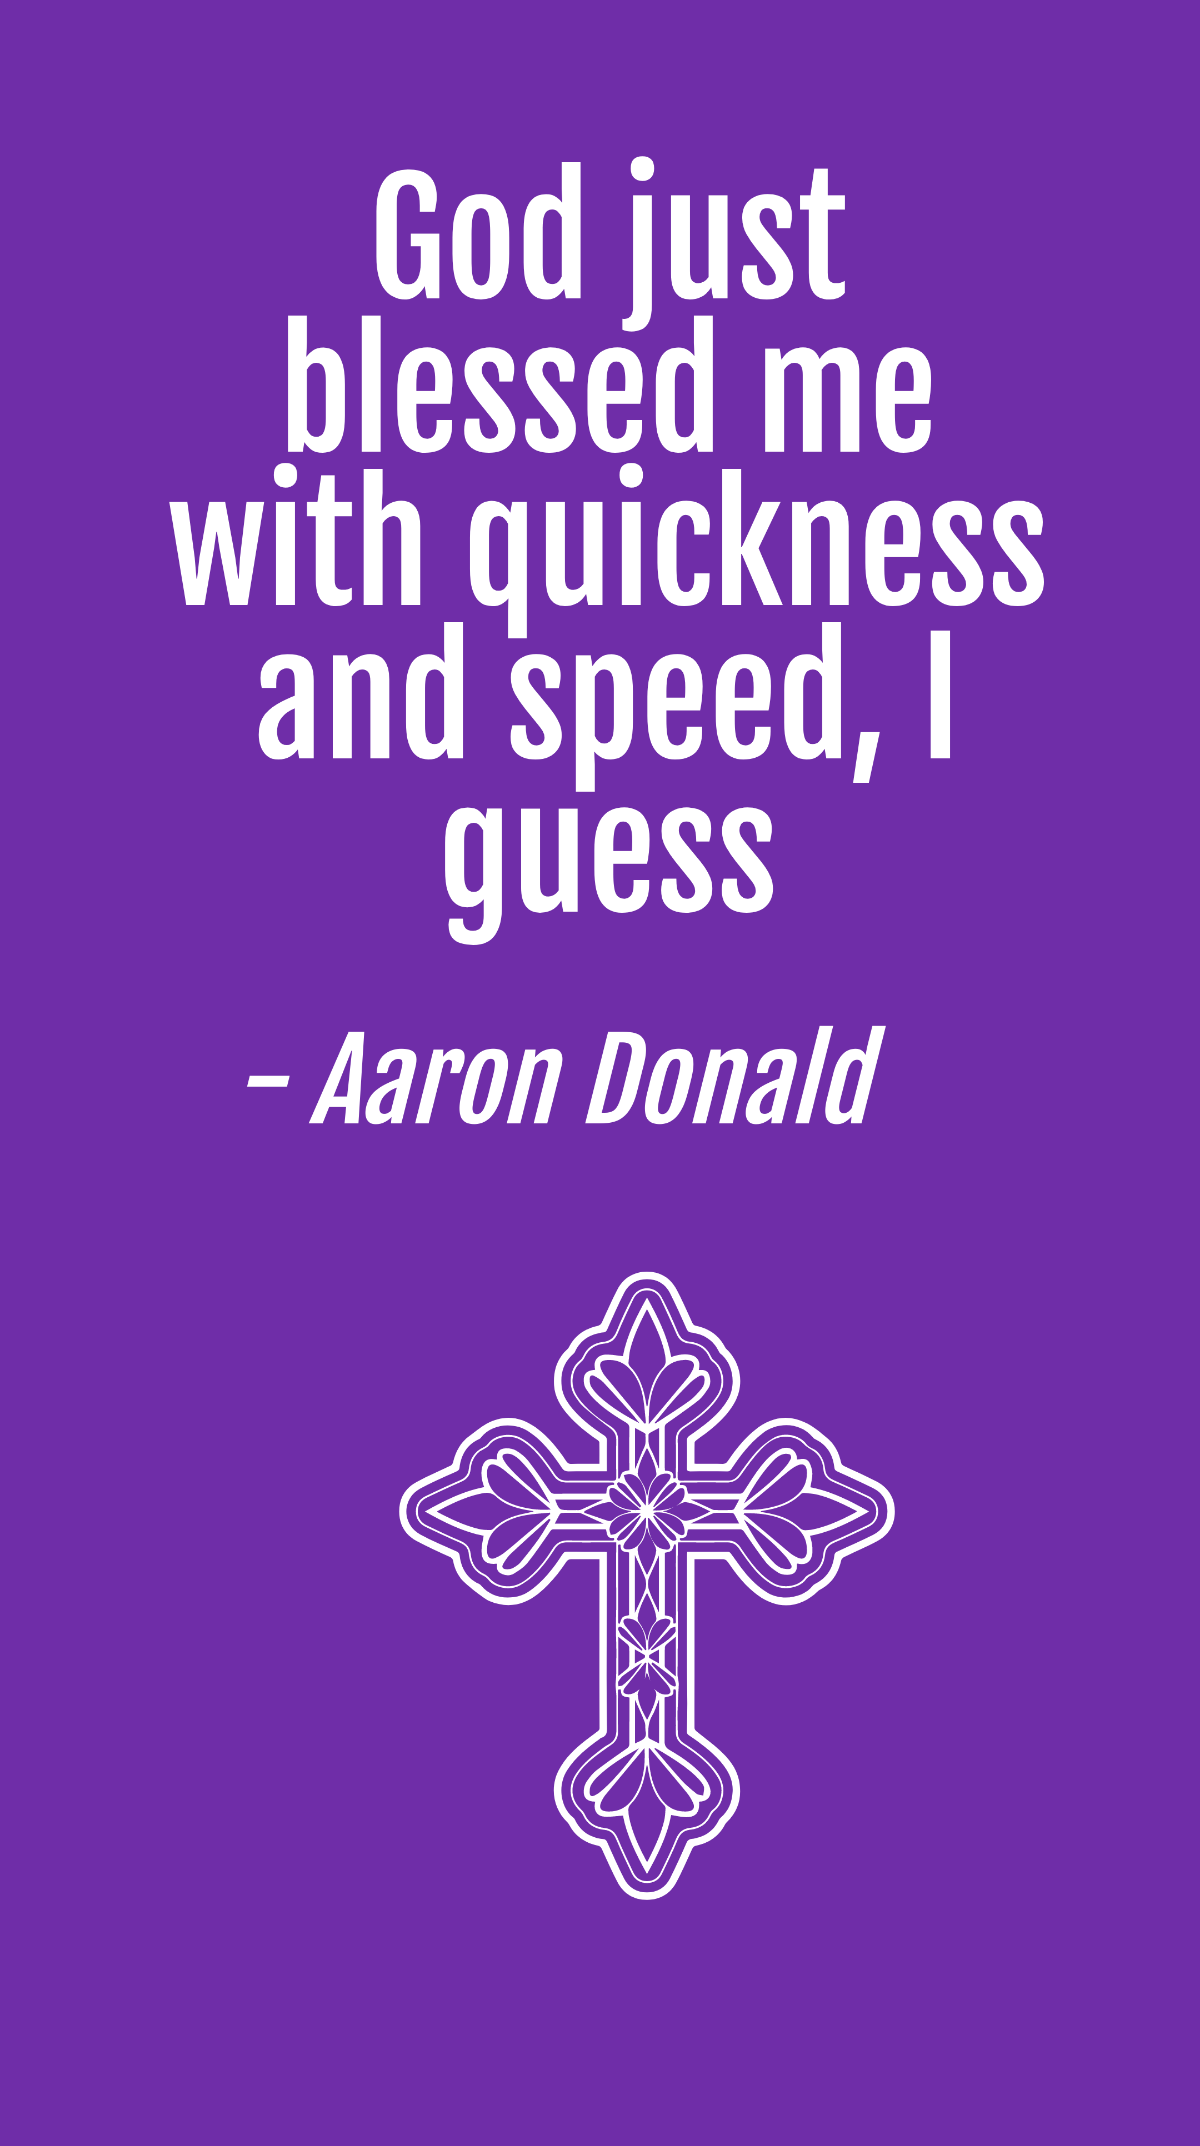 Aaron Donald - God just blessed me with quickness and speed, I guess Template